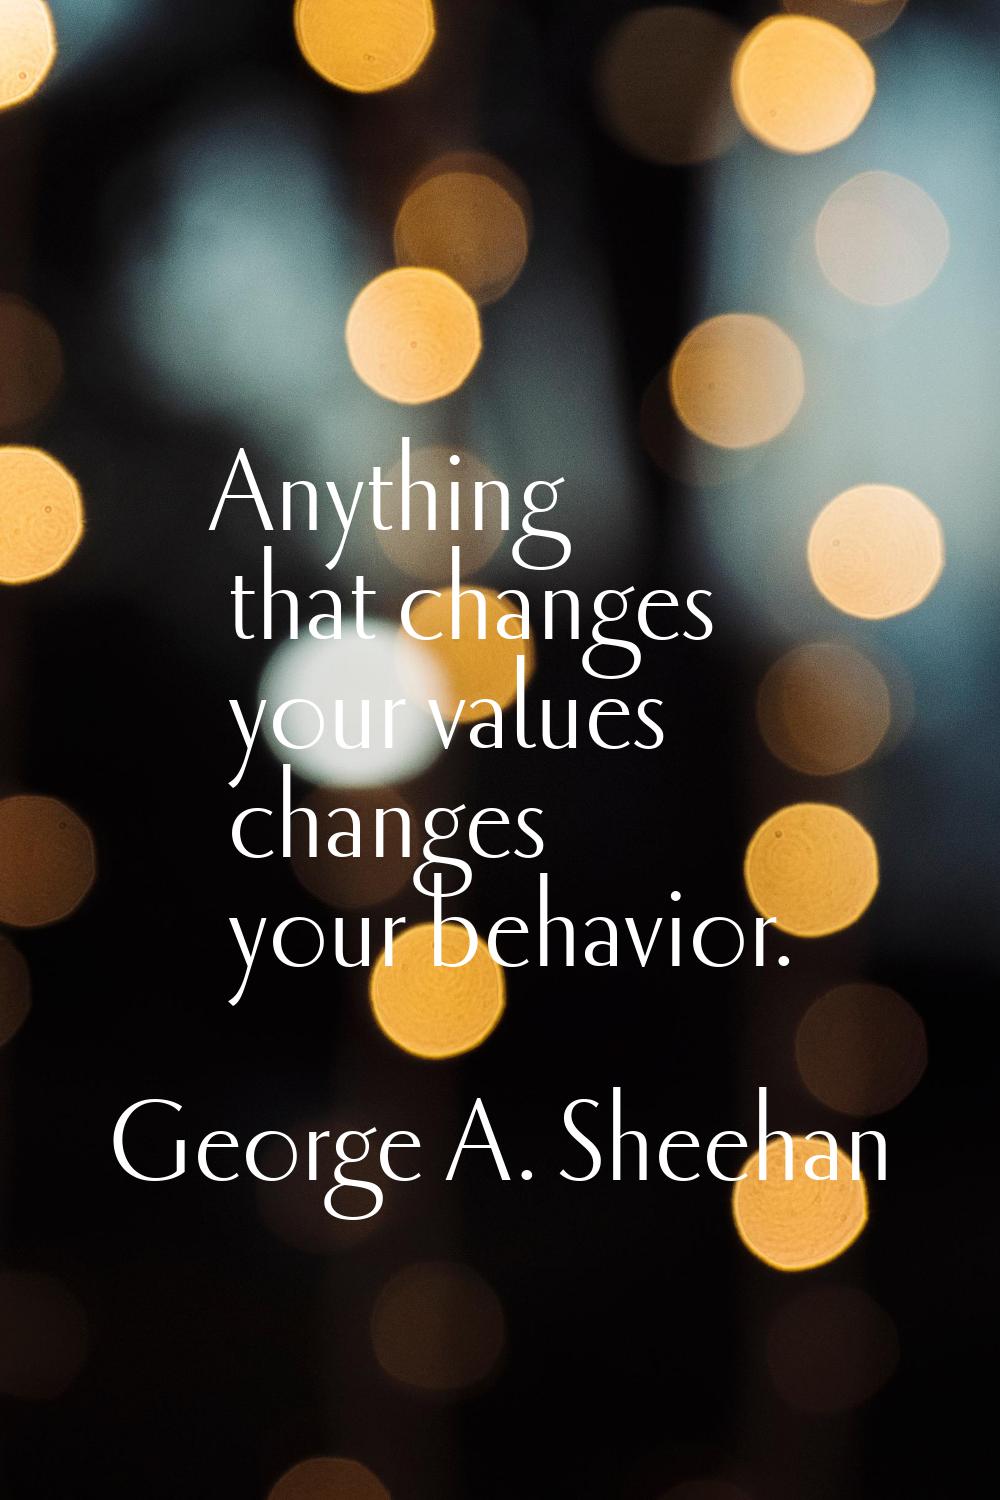 Anything that changes your values changes your behavior.